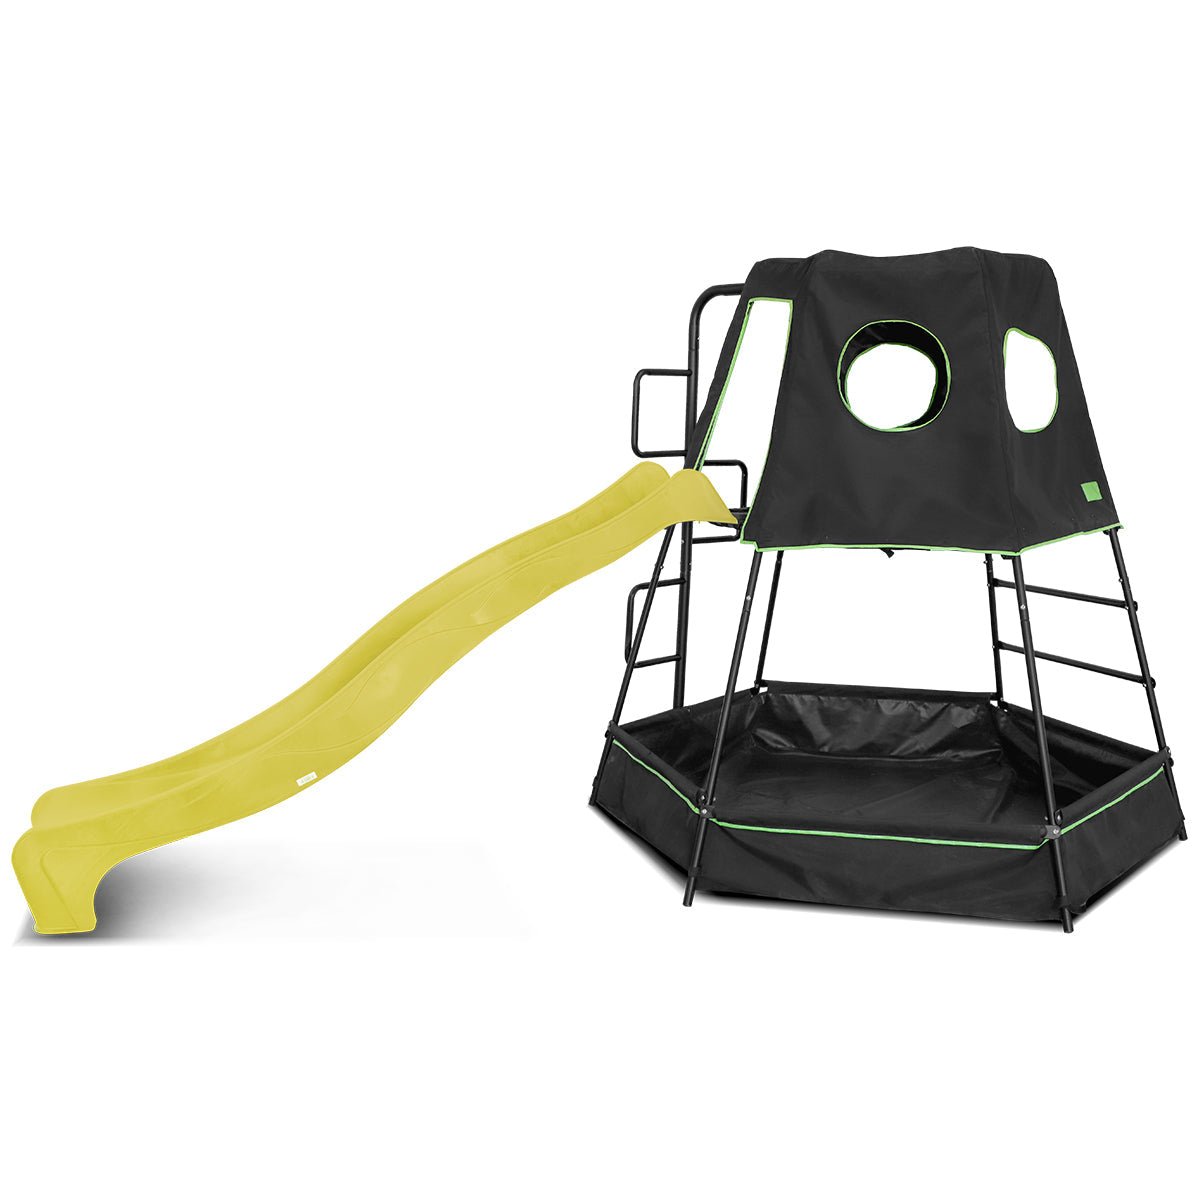 Shop Pallas Play Tower Yellow Slide with Sand Pit - Outdoor Joy